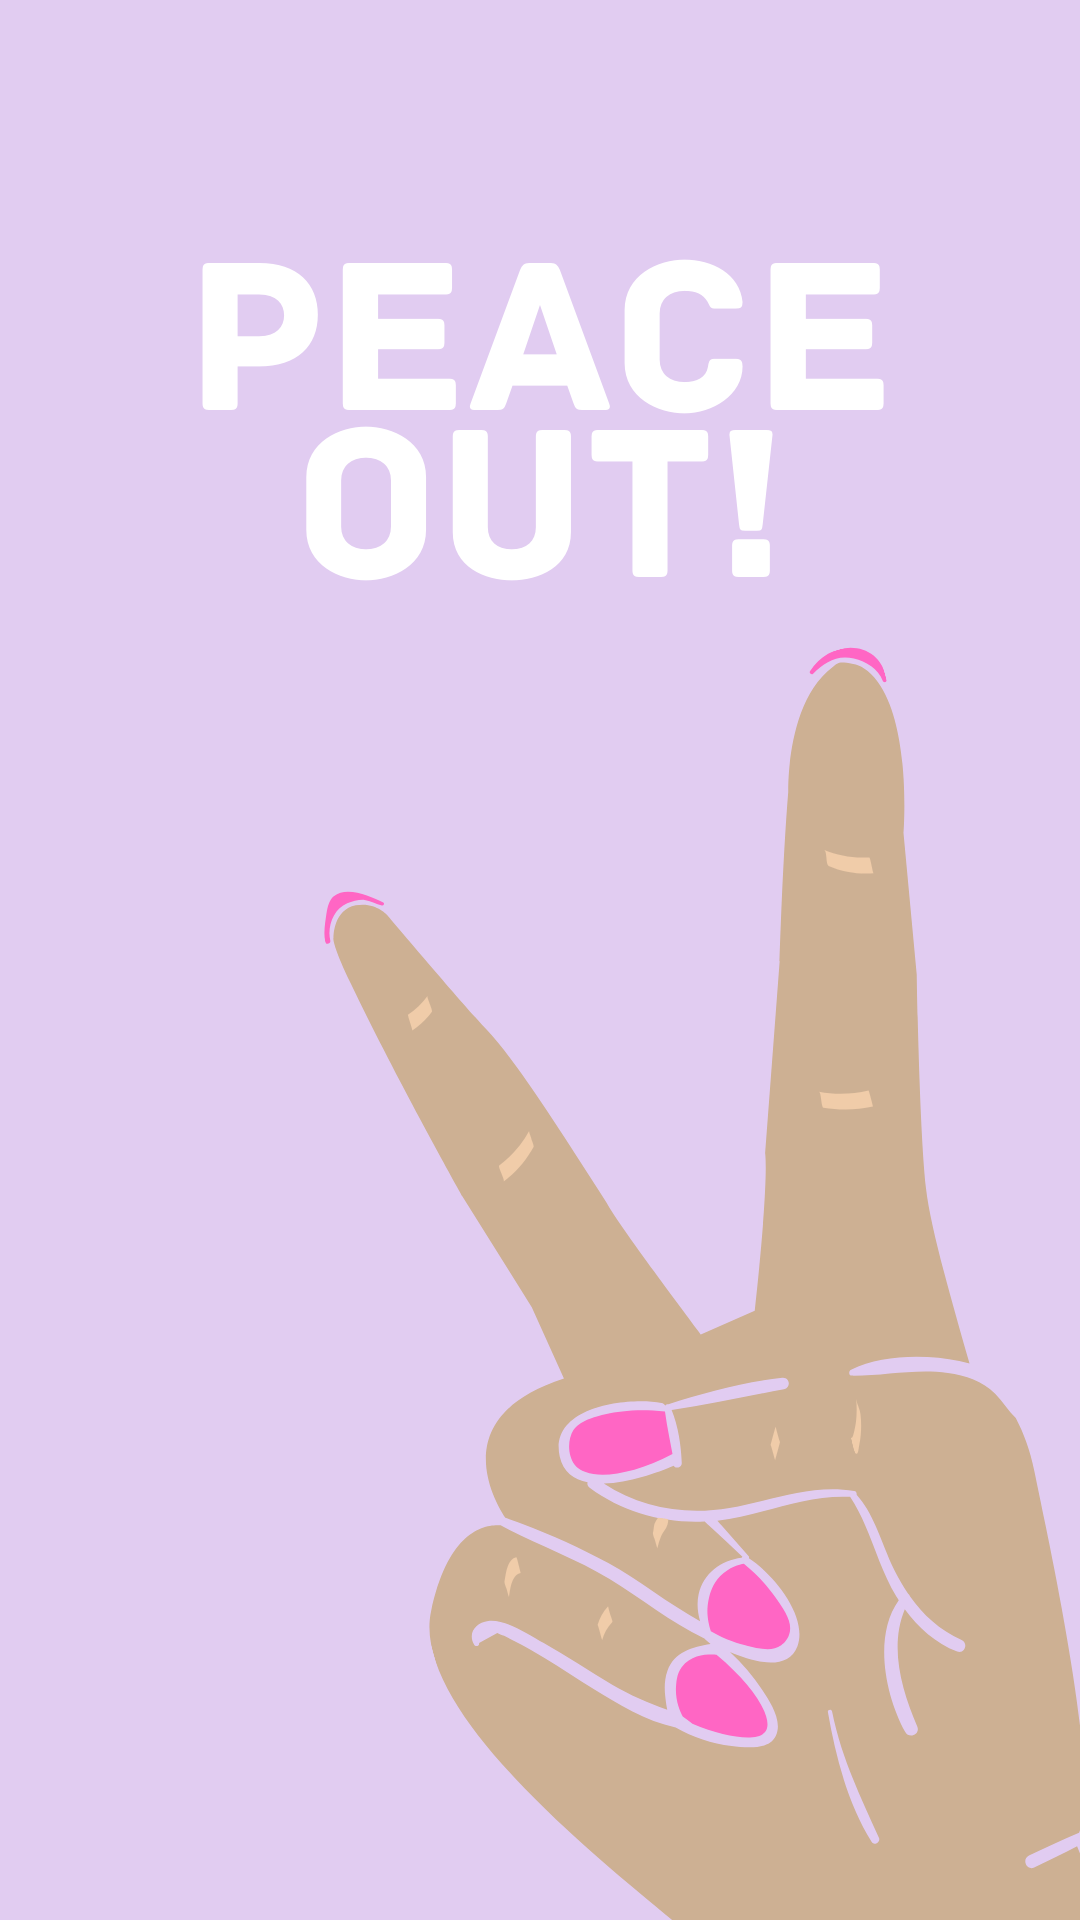 Peace Out Phone Wallpaper. Phone background wallpaper, Free phone wallpaper, Peace sign hand